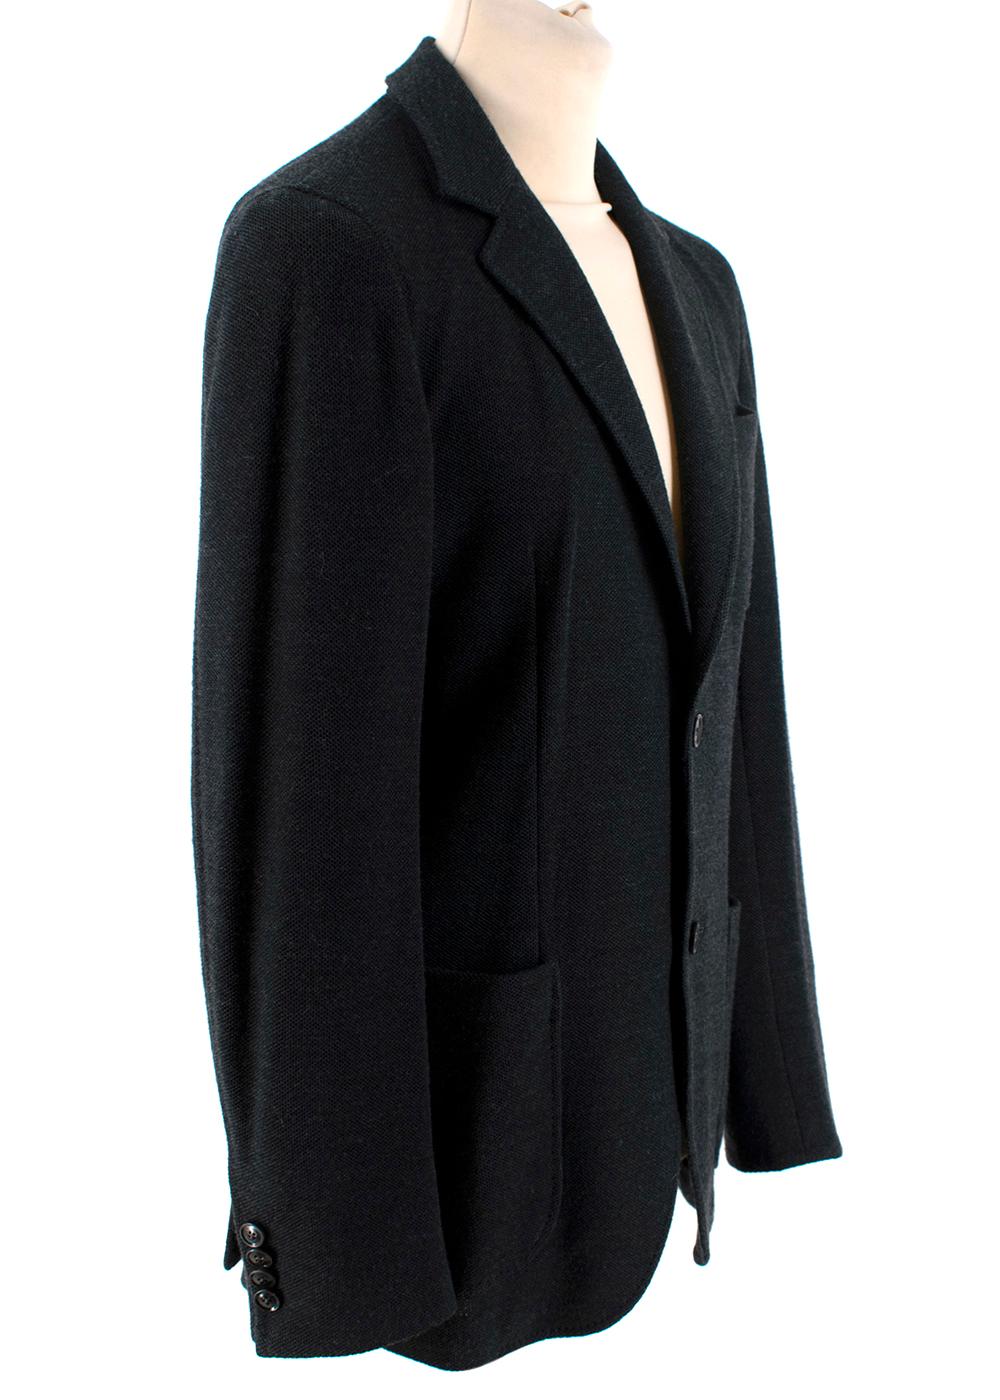 Ermenegildo Zegna Dark Grey Wool Single Breasted Jacket

- Notch lapels
- Chest welt and two front patch pockets with a smaller zipped pocket
- Single vent
- Internal pocket
- Tonal elbow patches
- Not lined

Materials:
100% Virgin Wool

Made in